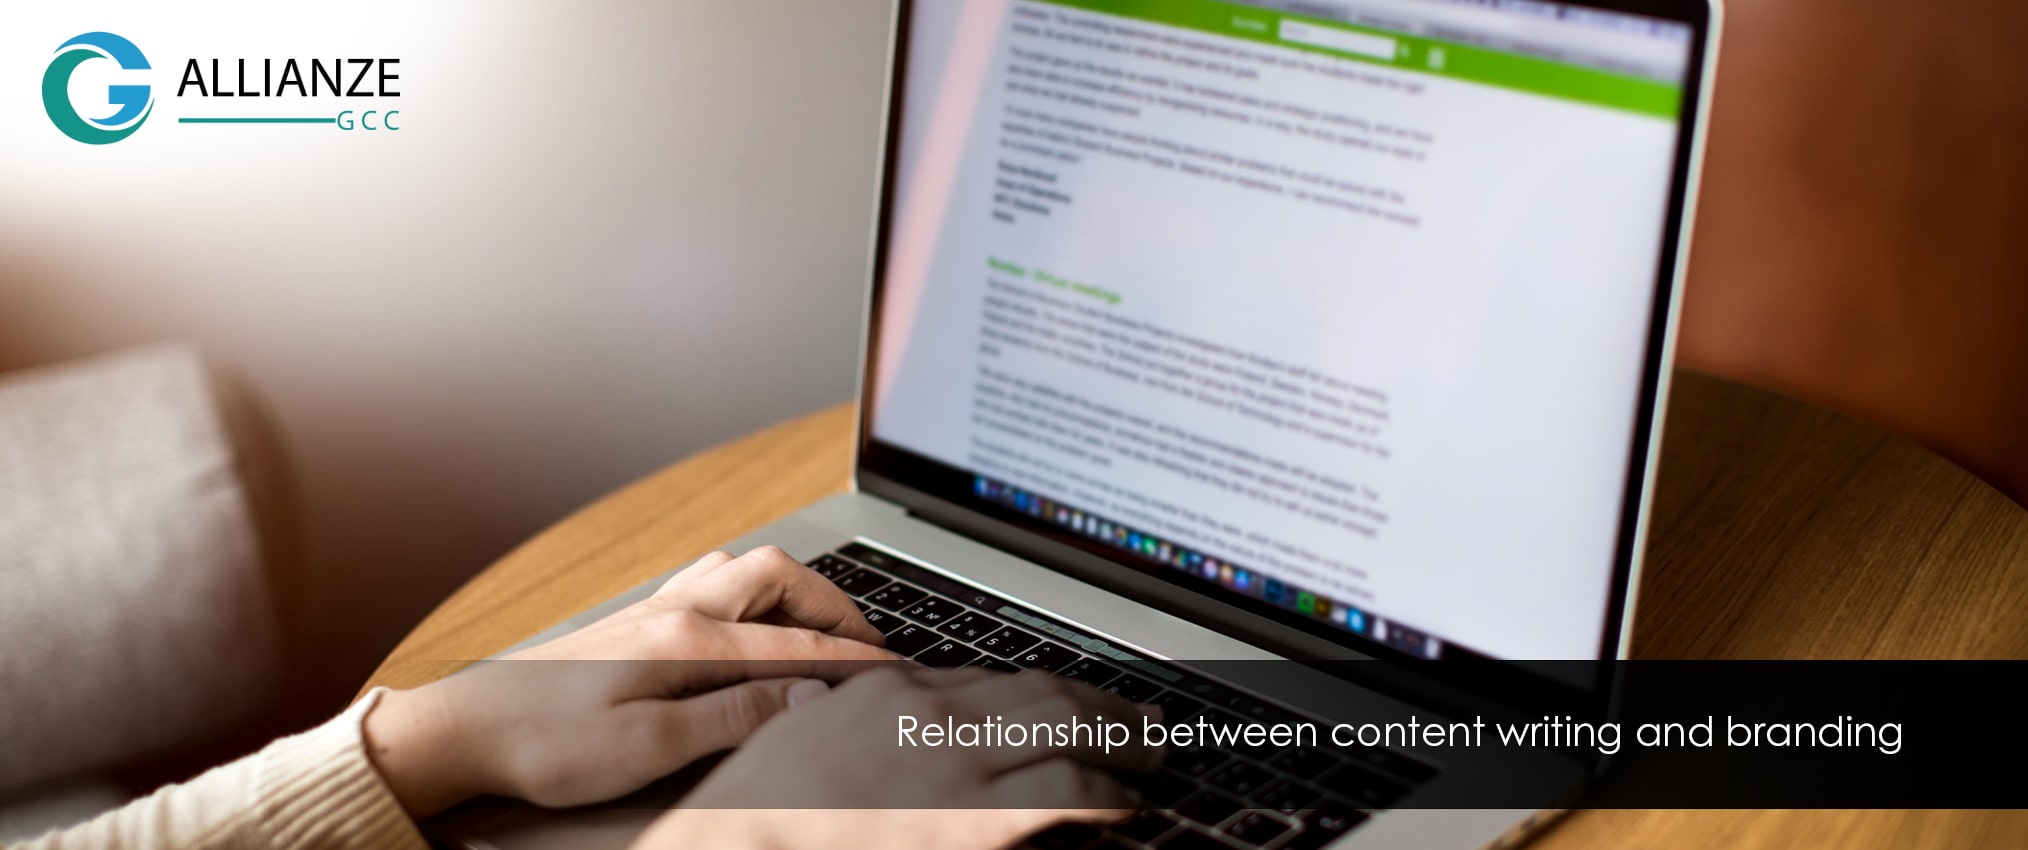 Relationship between Content Writing and Branding